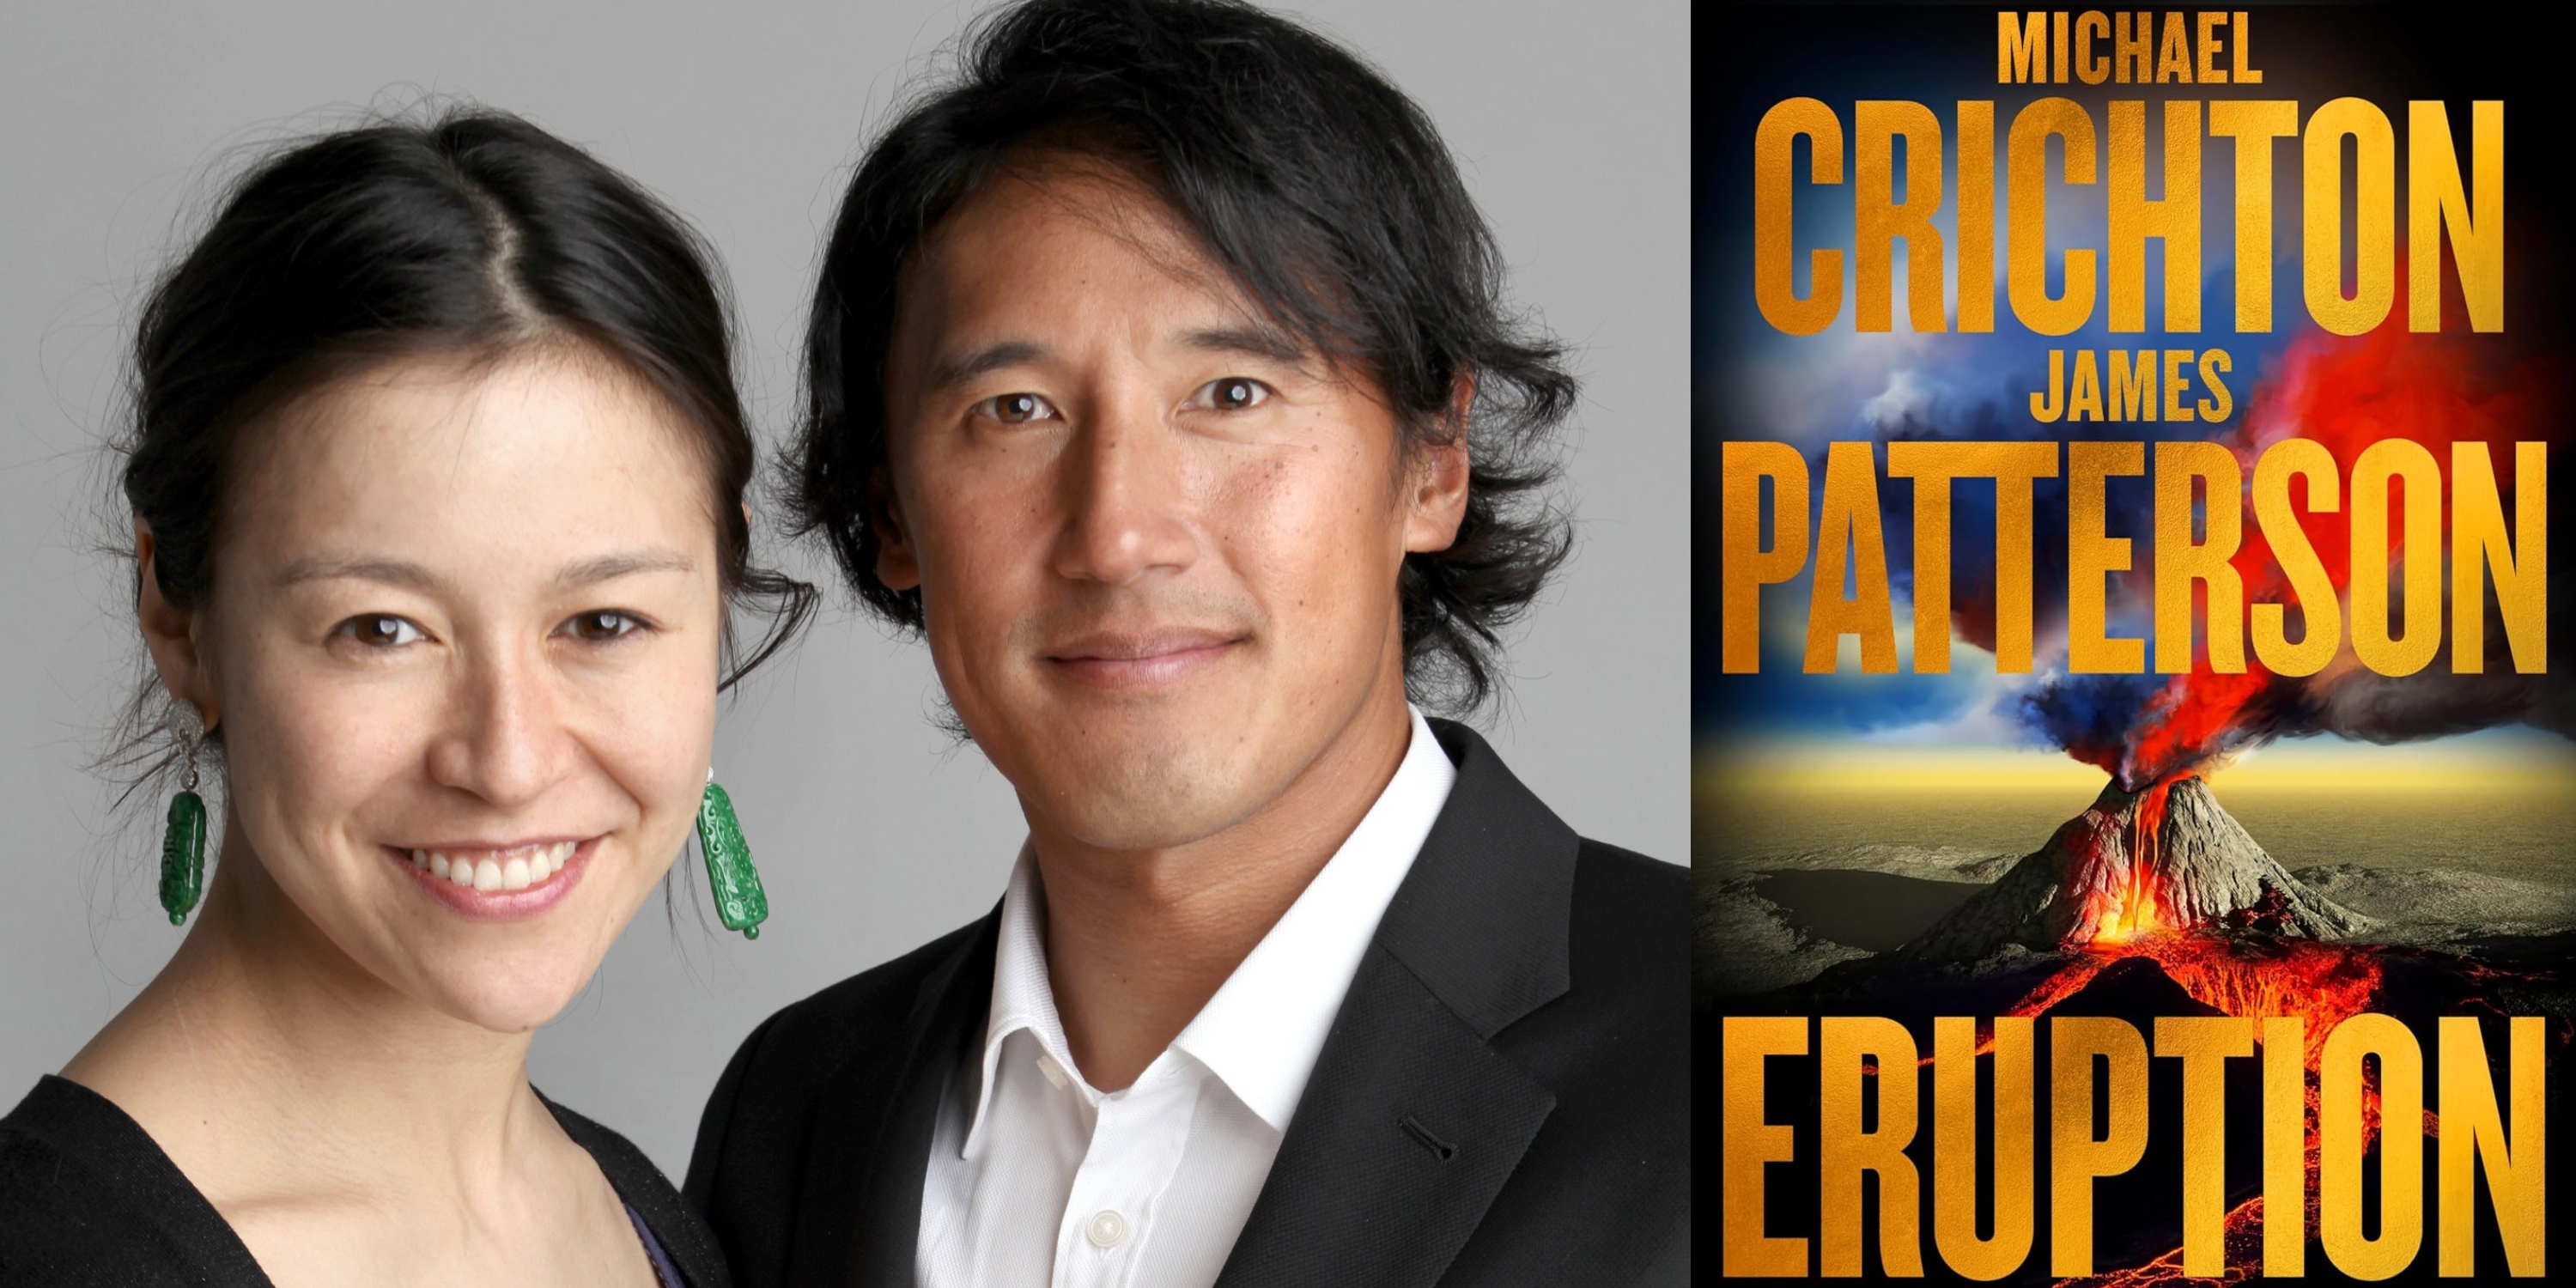 Deadline is exclusively reporting that Academy Award-winning directors Jimmy Chin and Elizabeth Chai Vasarhelyi have been brought onboard to helm the film adaptation of the Michael Crichton and James Patterson novel Eruption.